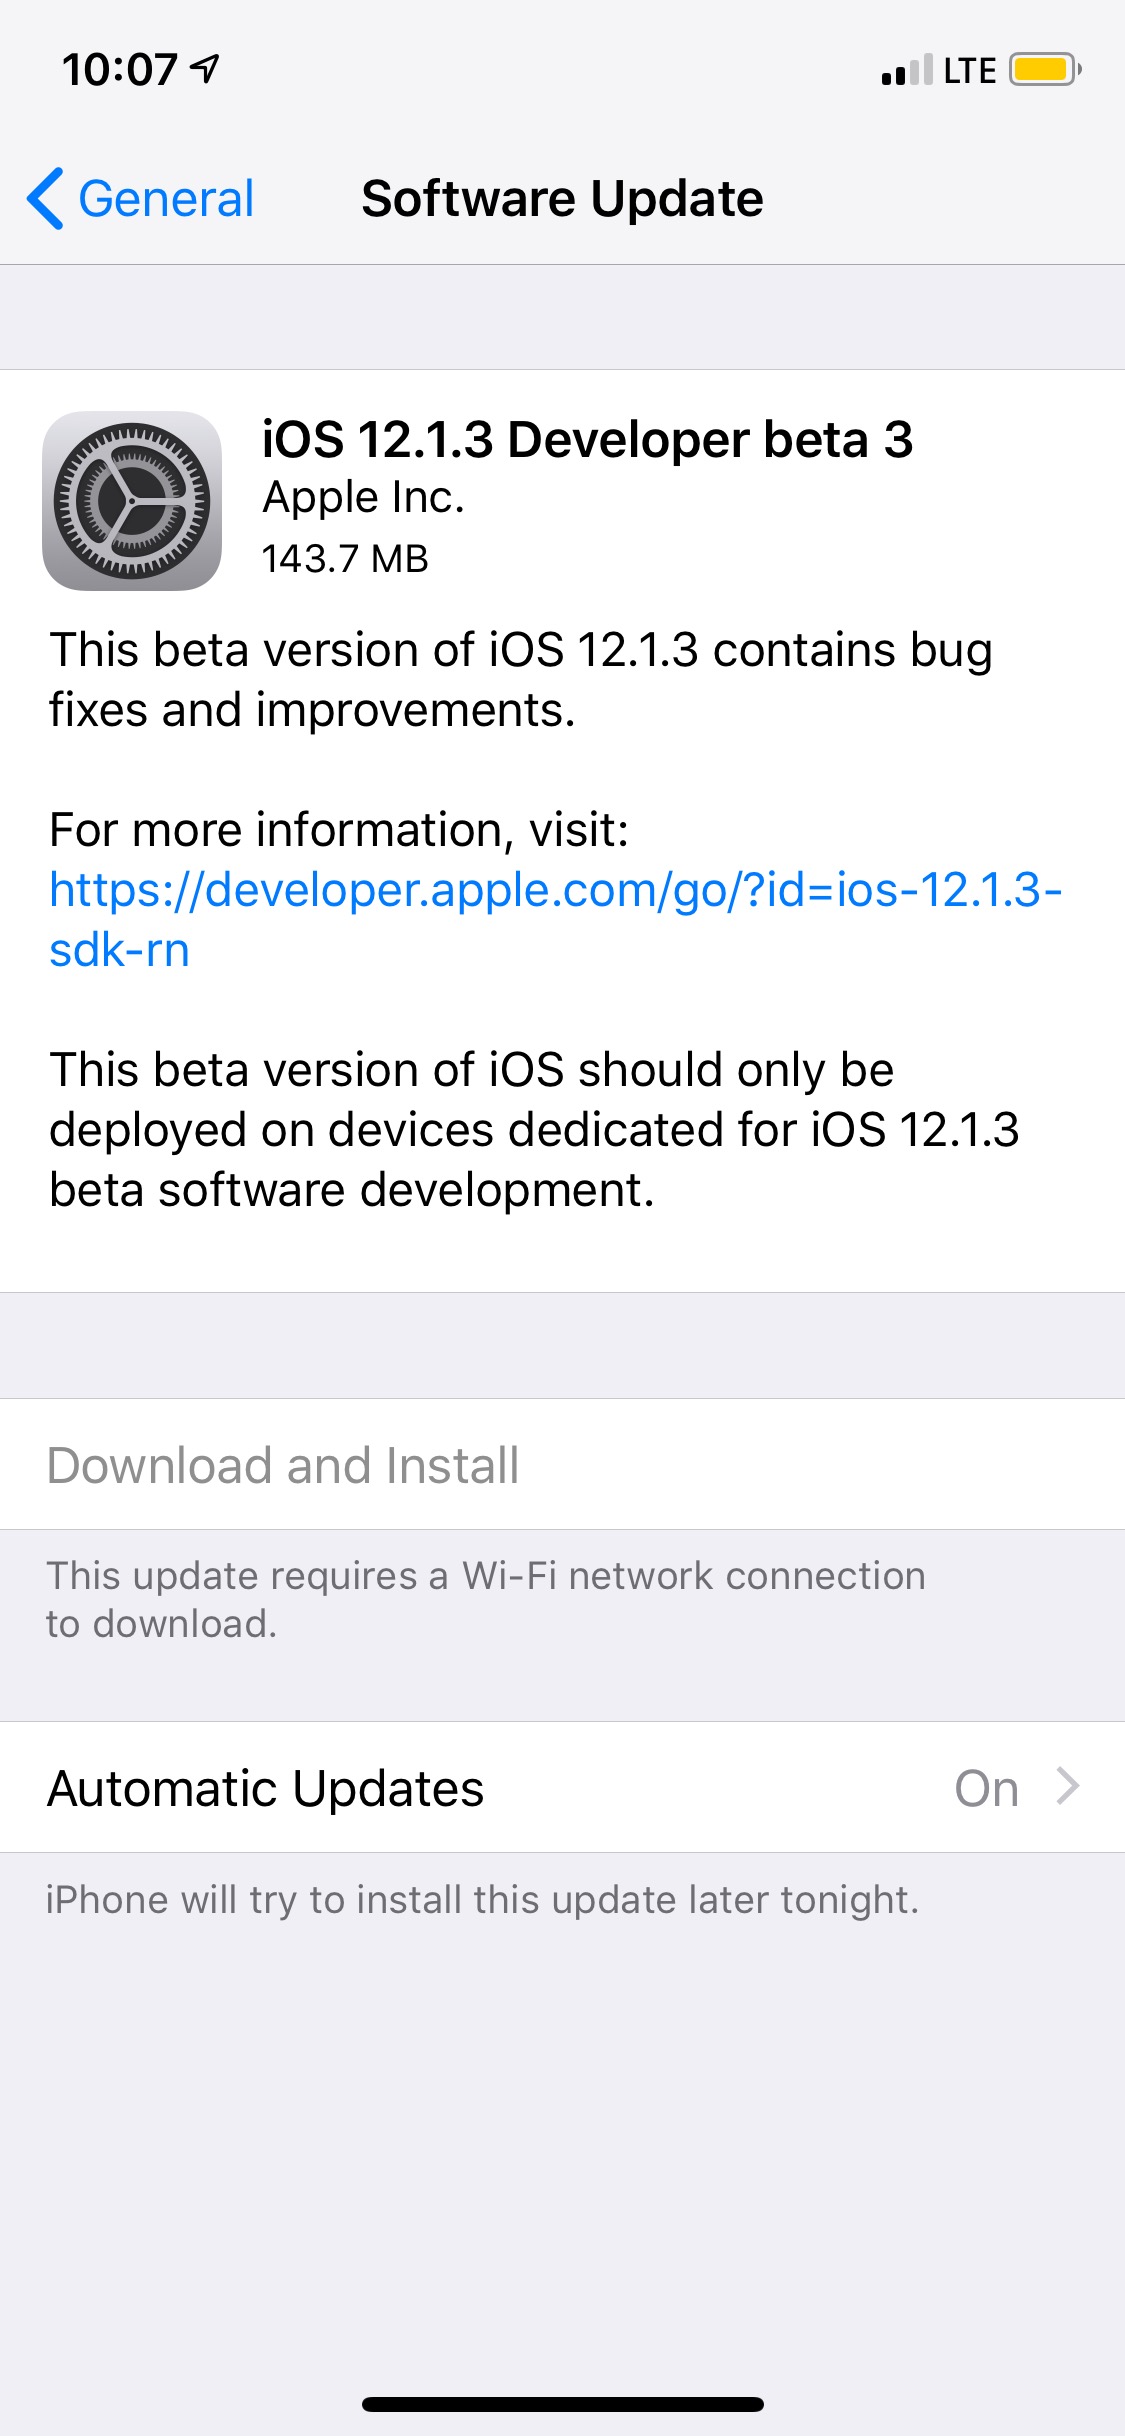 Apple Releases iOS 12.1.3 Beta 3 to Developers [Download]